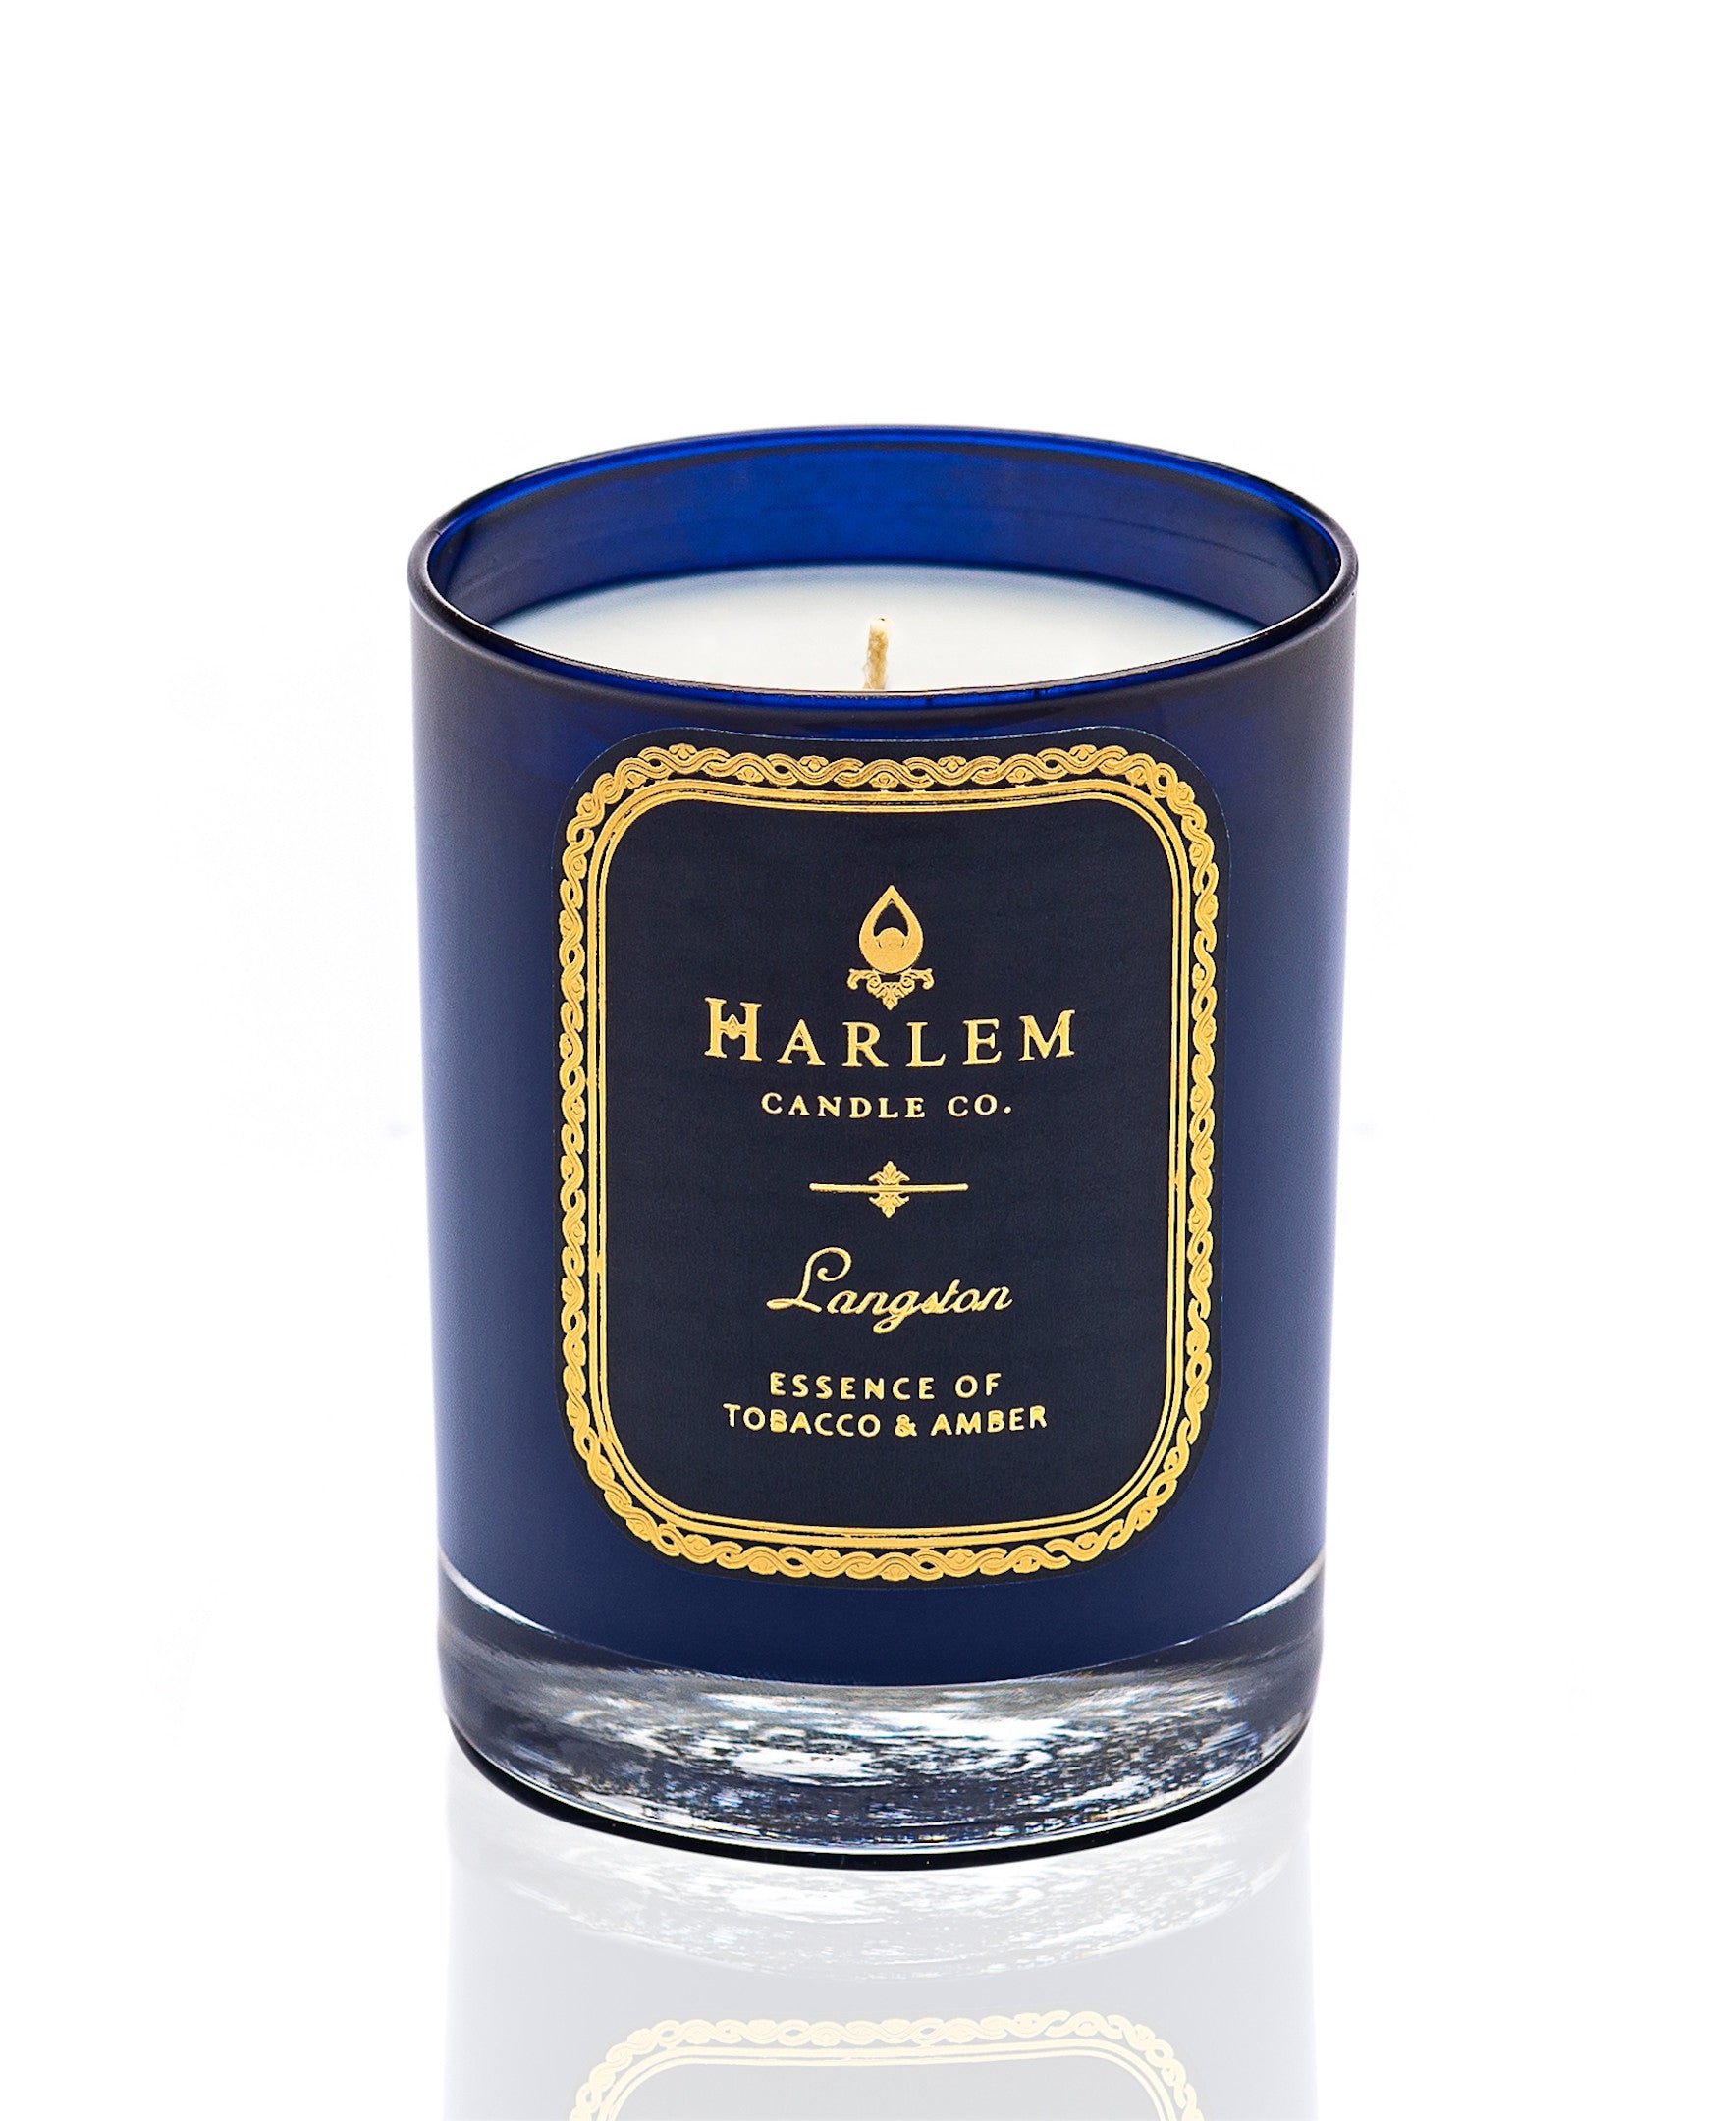 This is an image of our Langston candle in a blue glass with a single wick. It is featured on a white background.